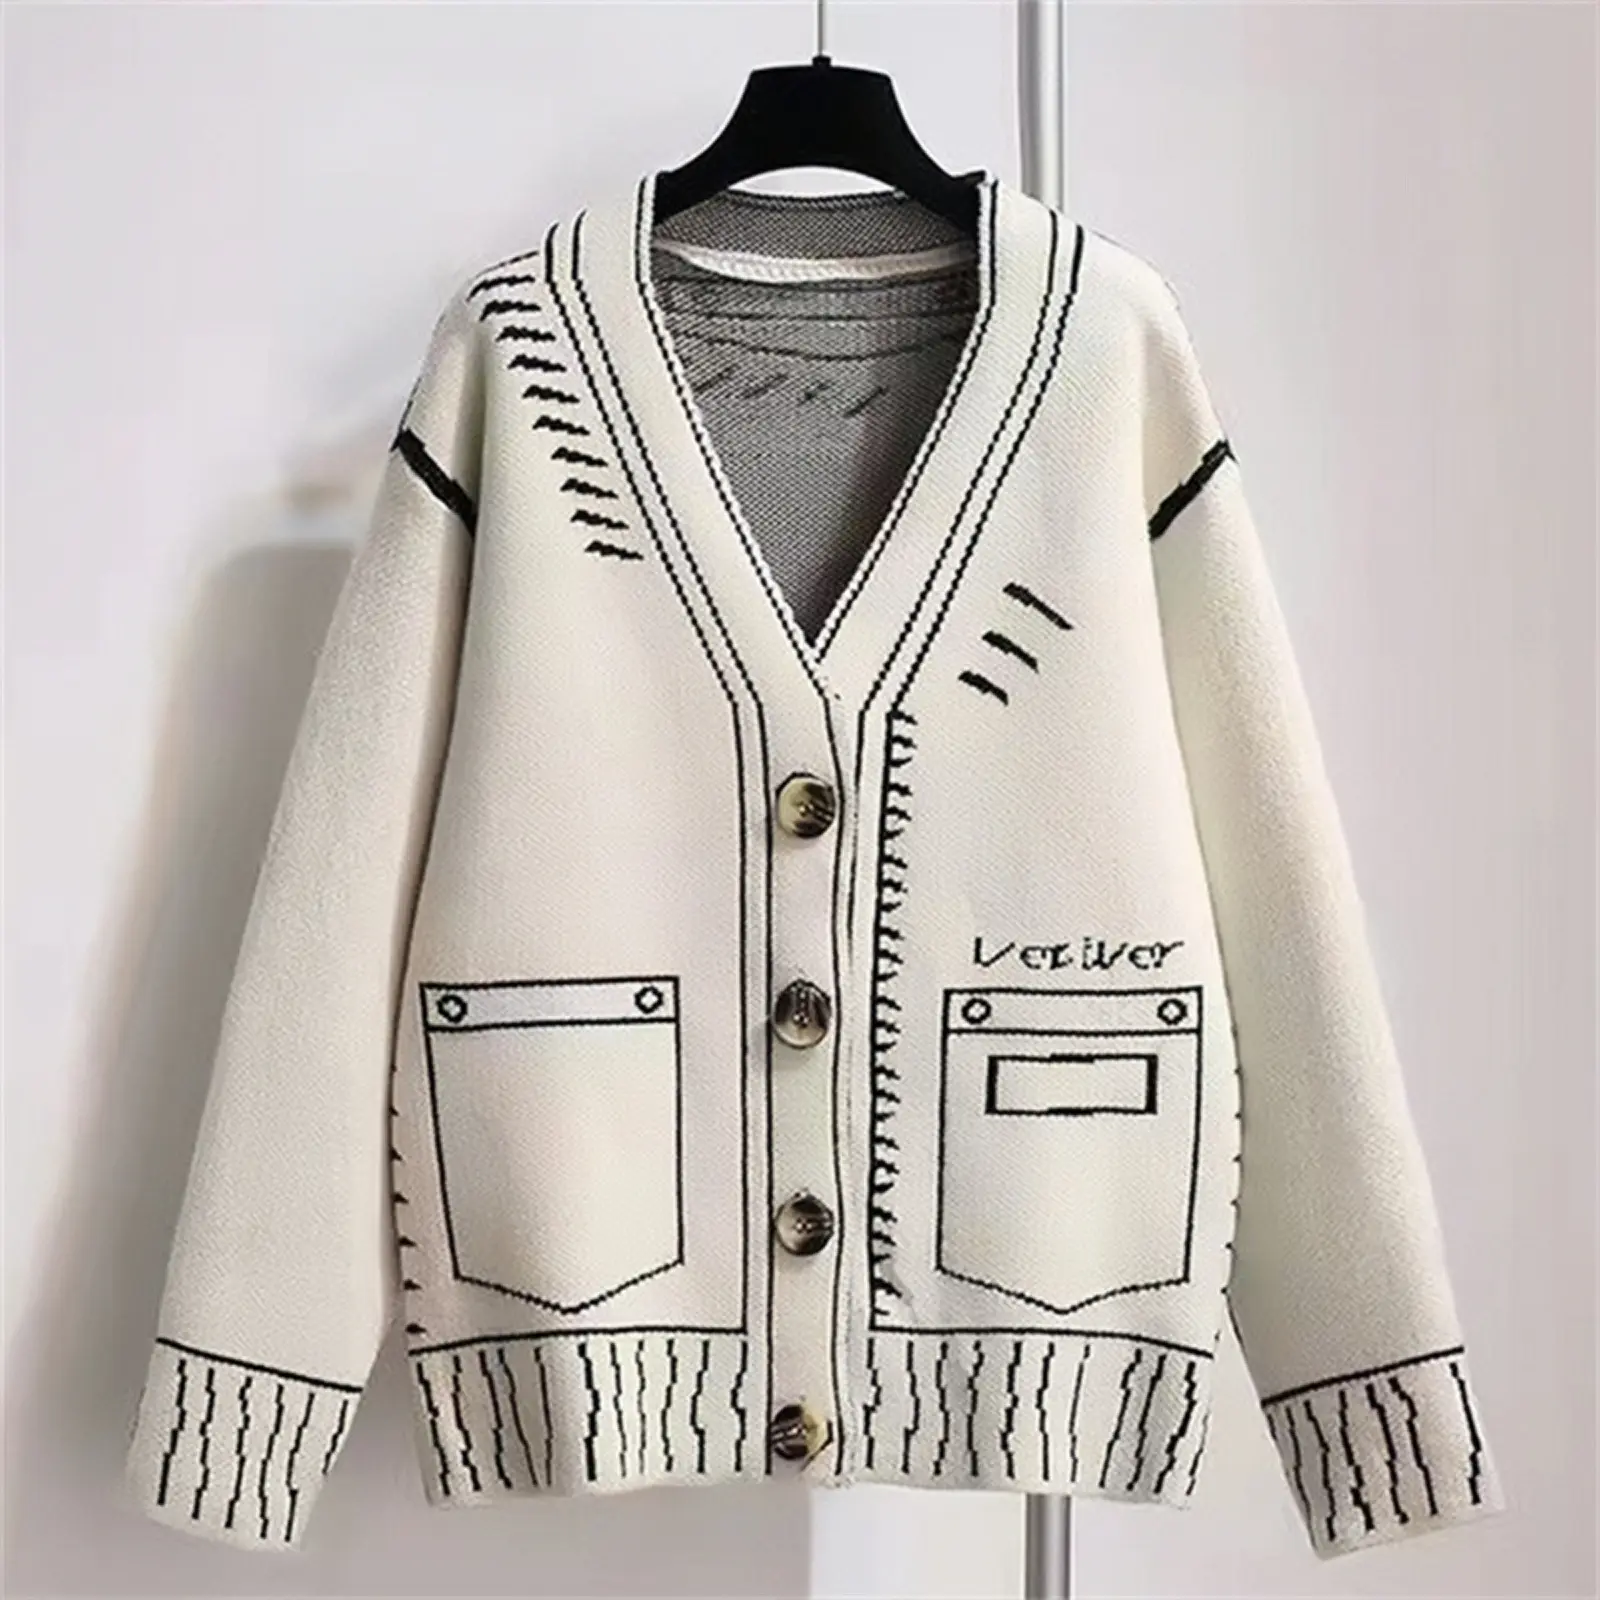 New arrival women knit Sweater Cardigan white and black cheap women's cotton v neck sweater